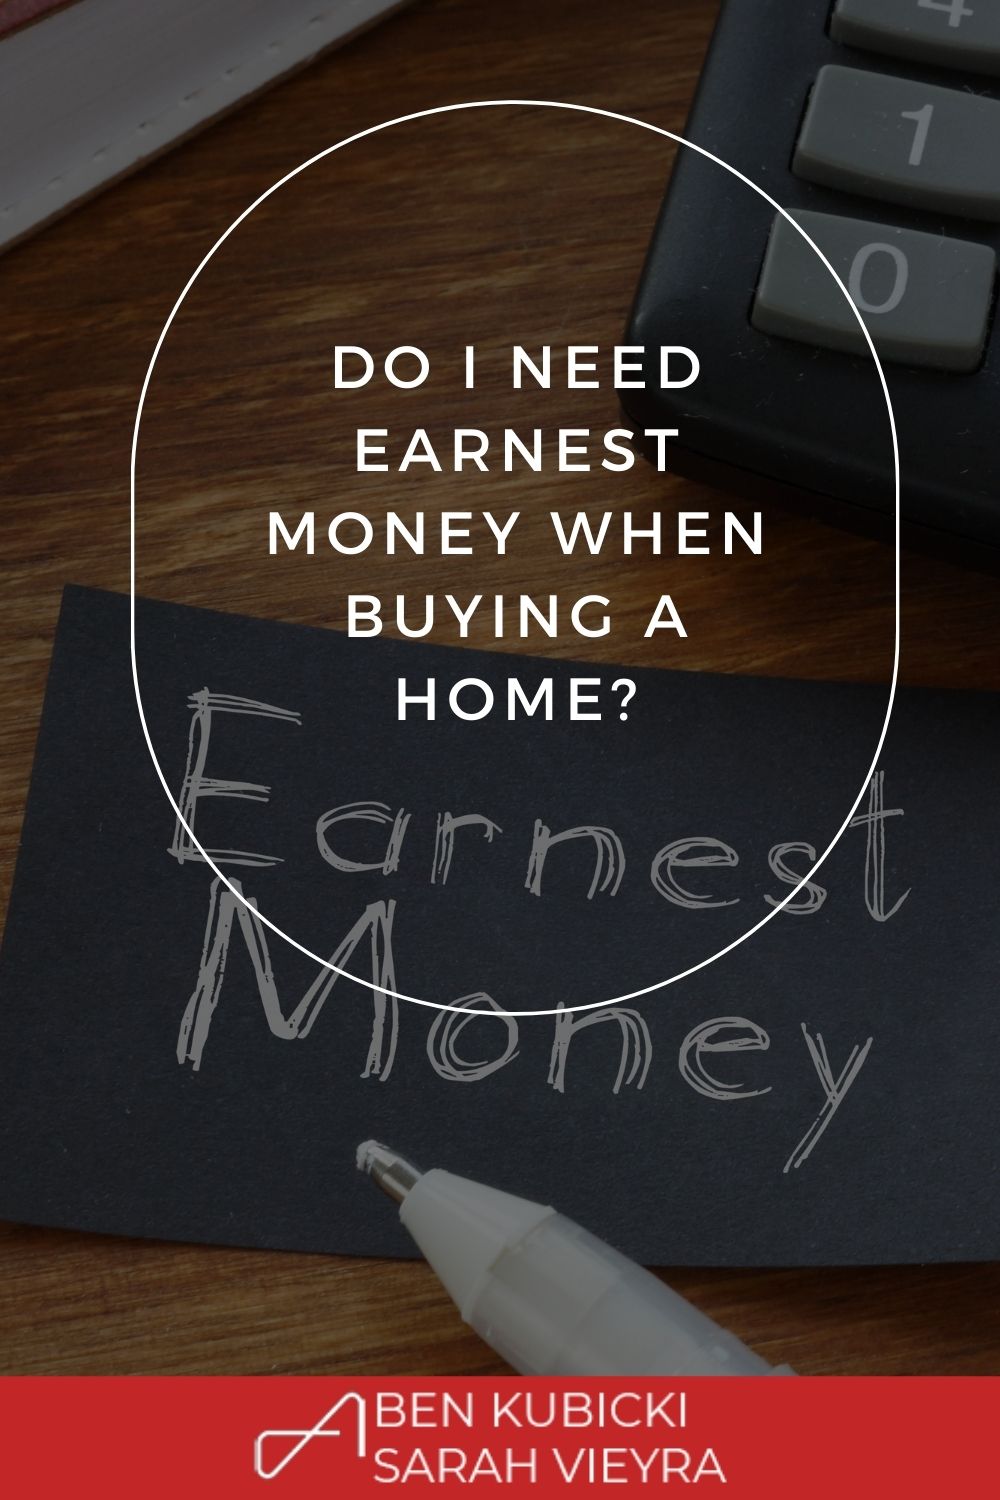 Do I Need Earnest Money When Buying a Home